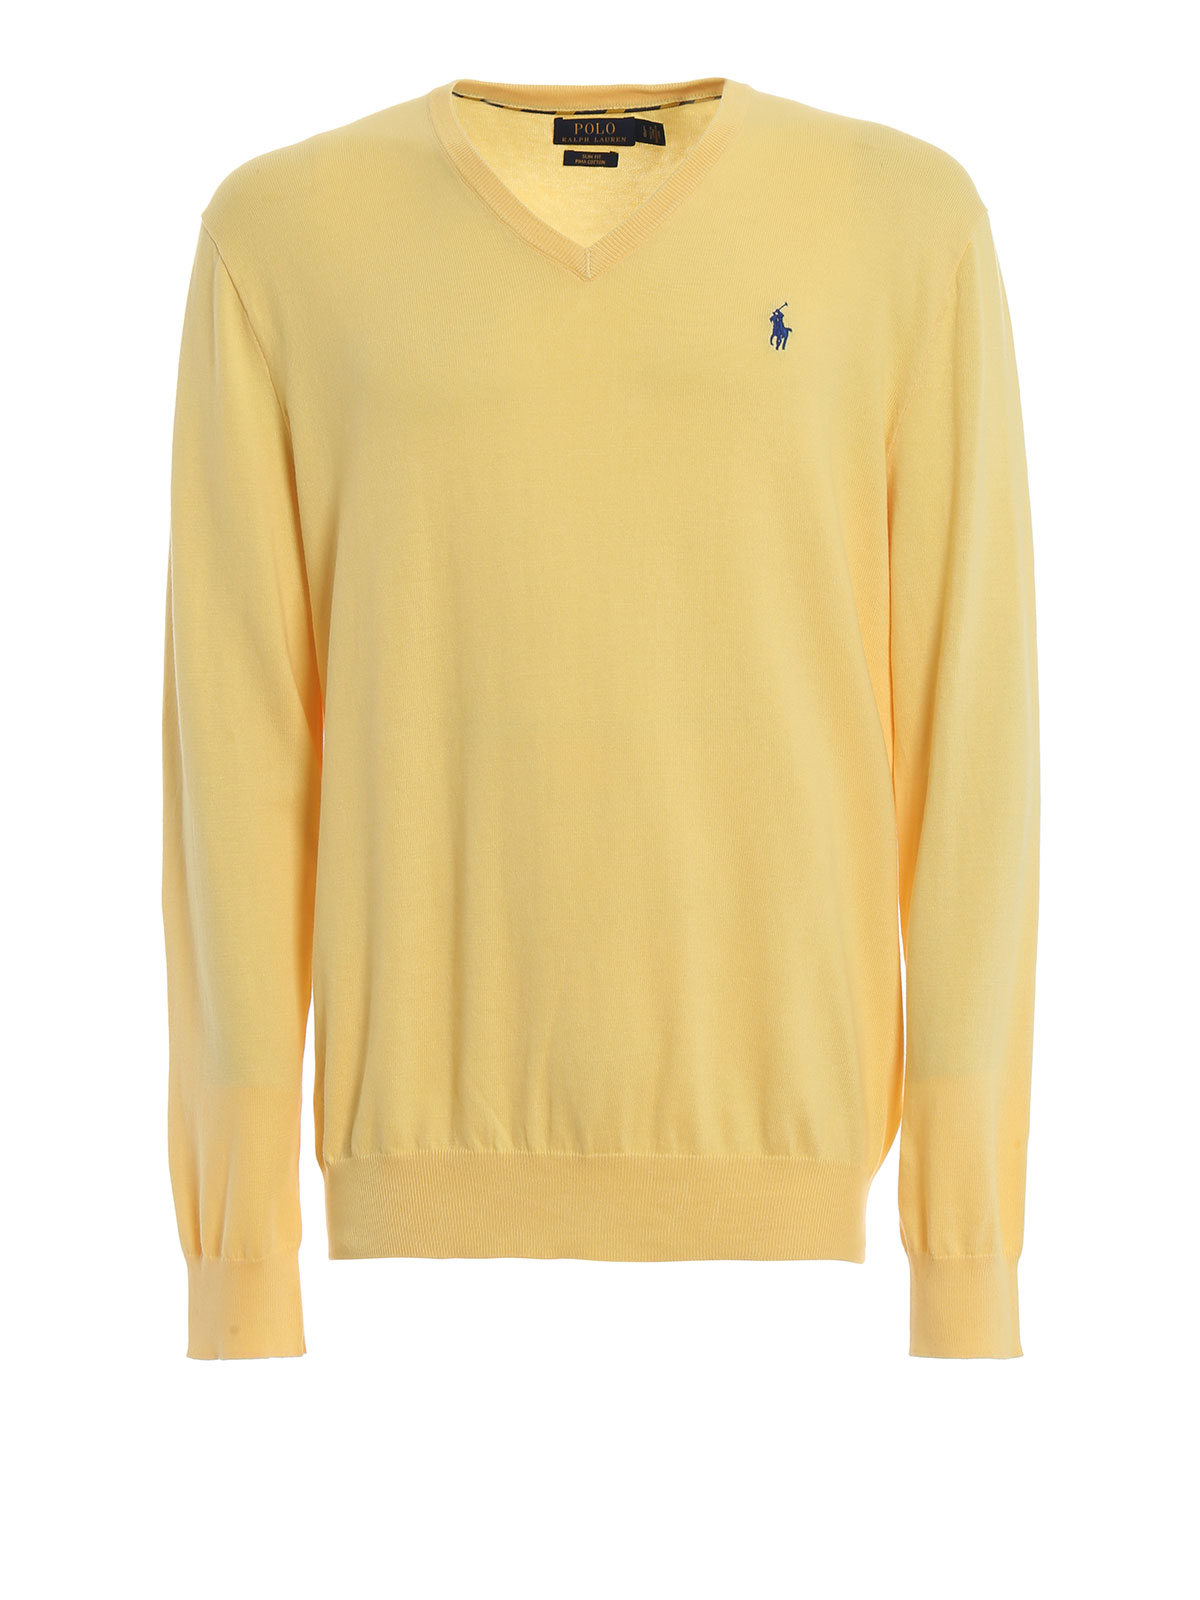 Slim fit yellow cotton V-neck sweater 